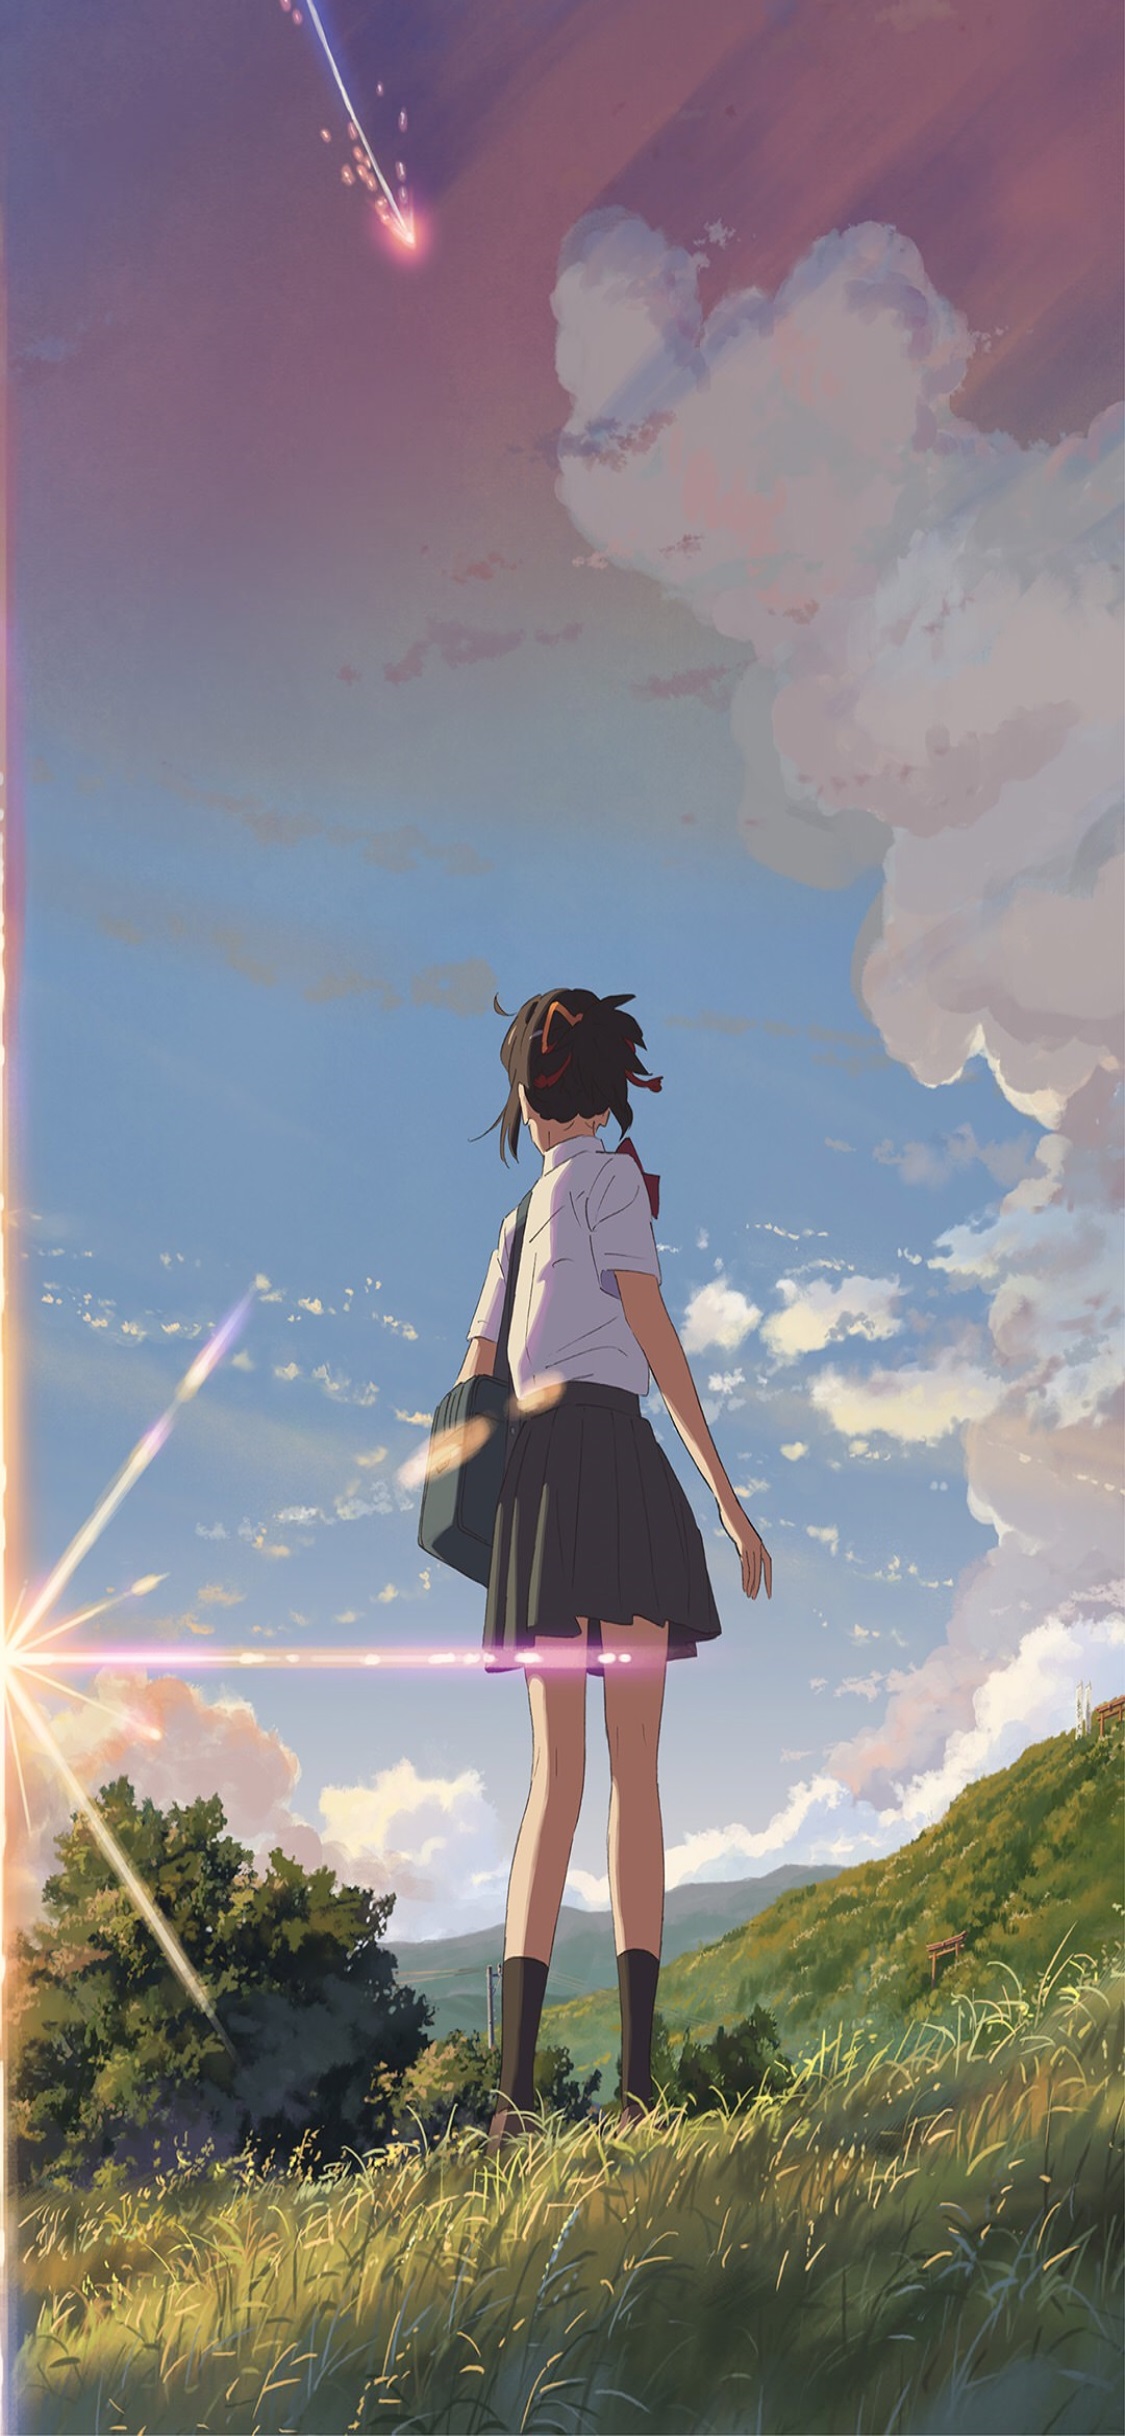 Your Name Wallpaper For Iphone - Your Name Wallpaper Iphone X - HD Wallpaper 